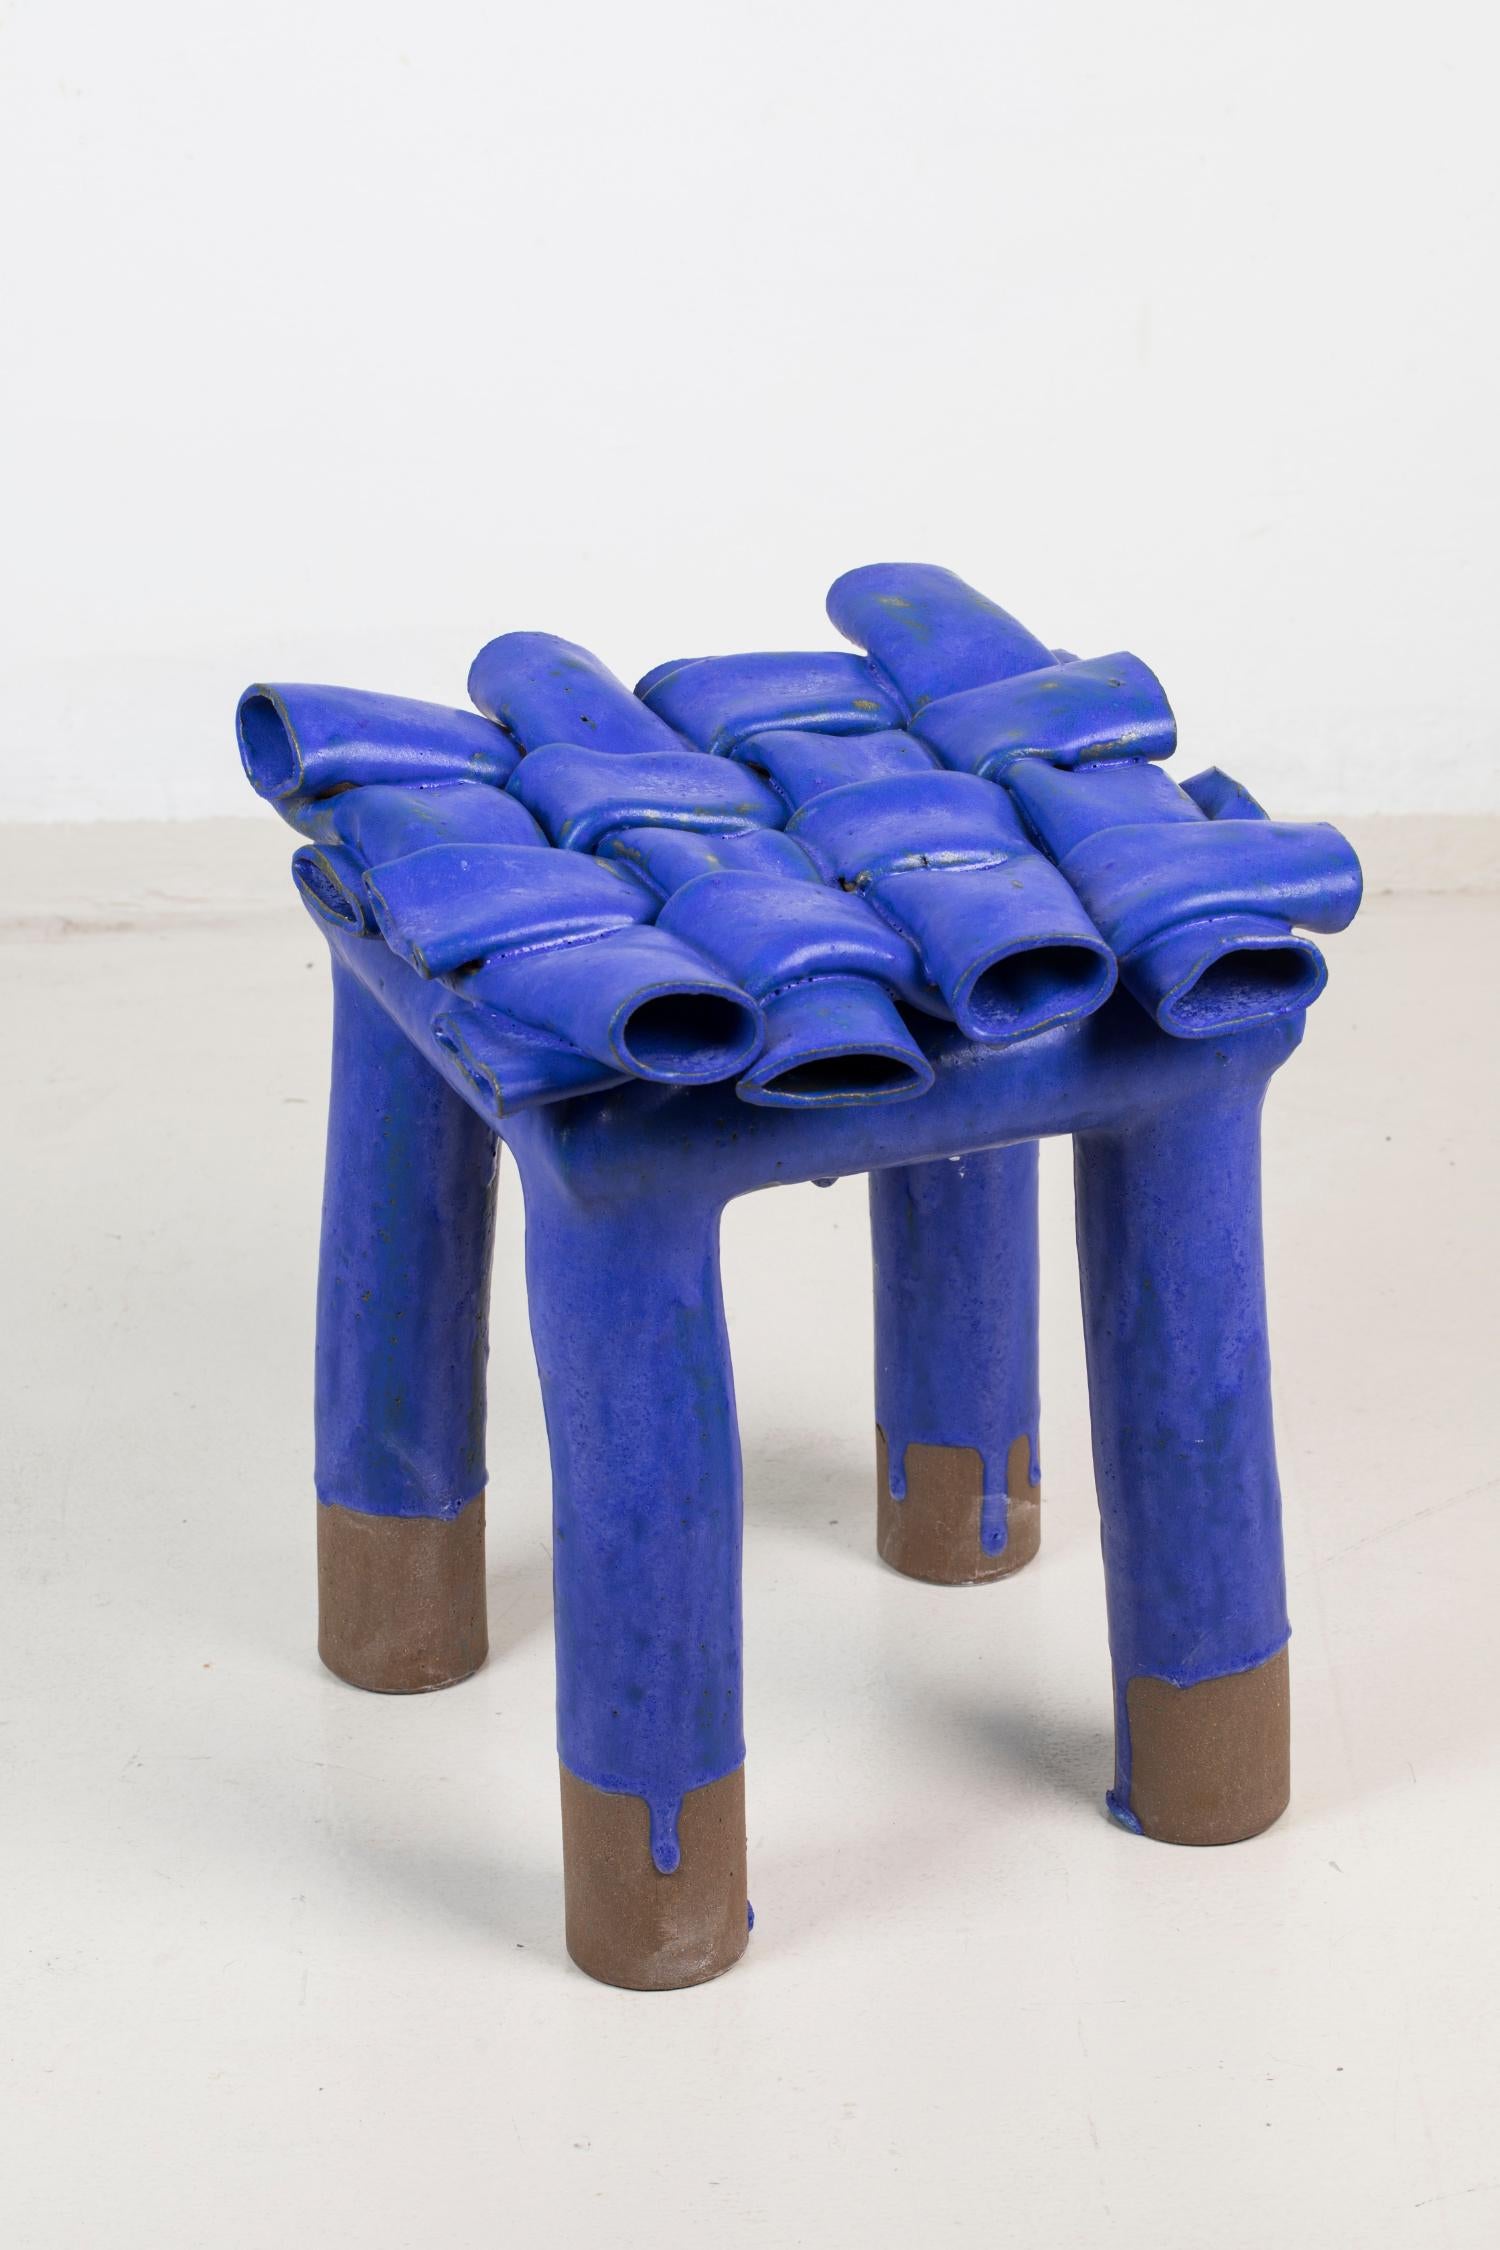 Blue stool by Milan Pekar
Dimensions: 40 x 40 x 42 cm
Materials: Stoneware with Salt Glaze

handmade in the Czech Republic. 
Also available in different colors.

Stoneware with salt glaze.

Established own studio August 2009 – Focus mainly